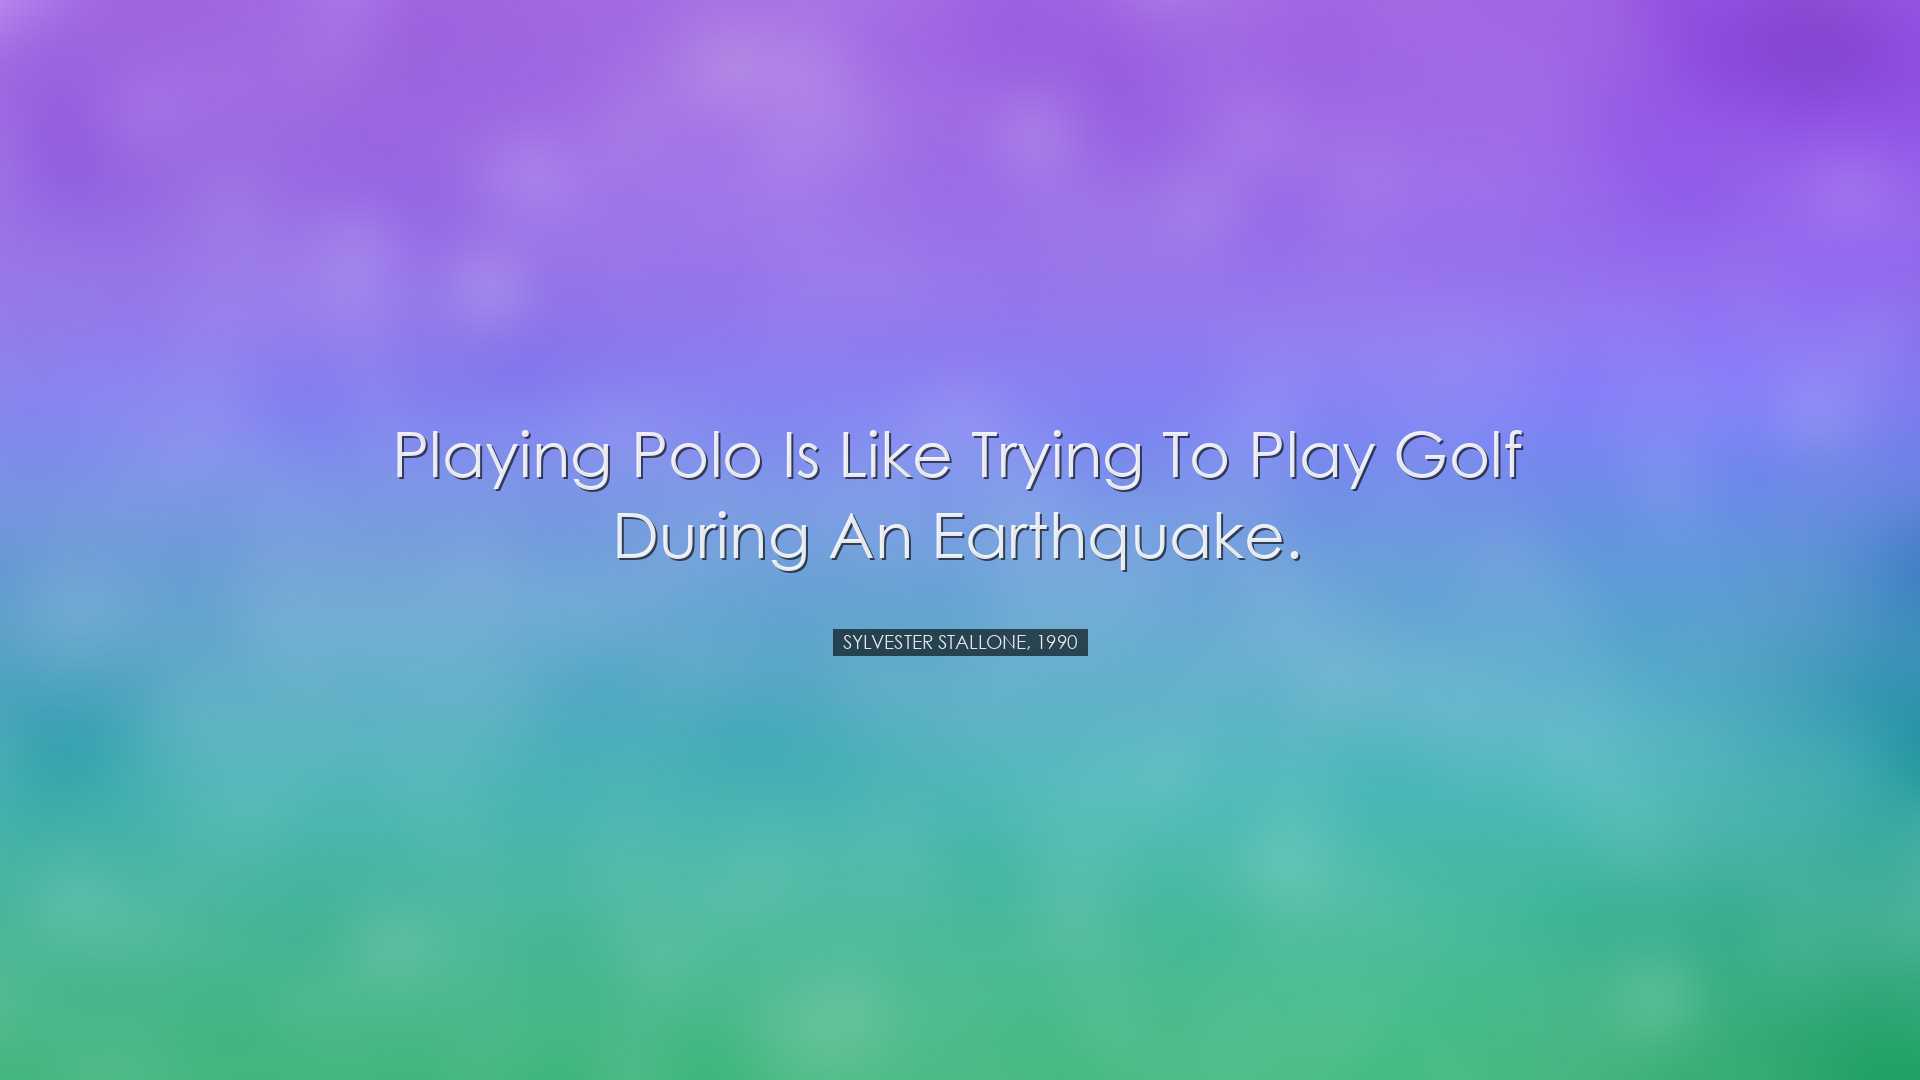 Playing polo is like trying to play golf during an earthquake. - S